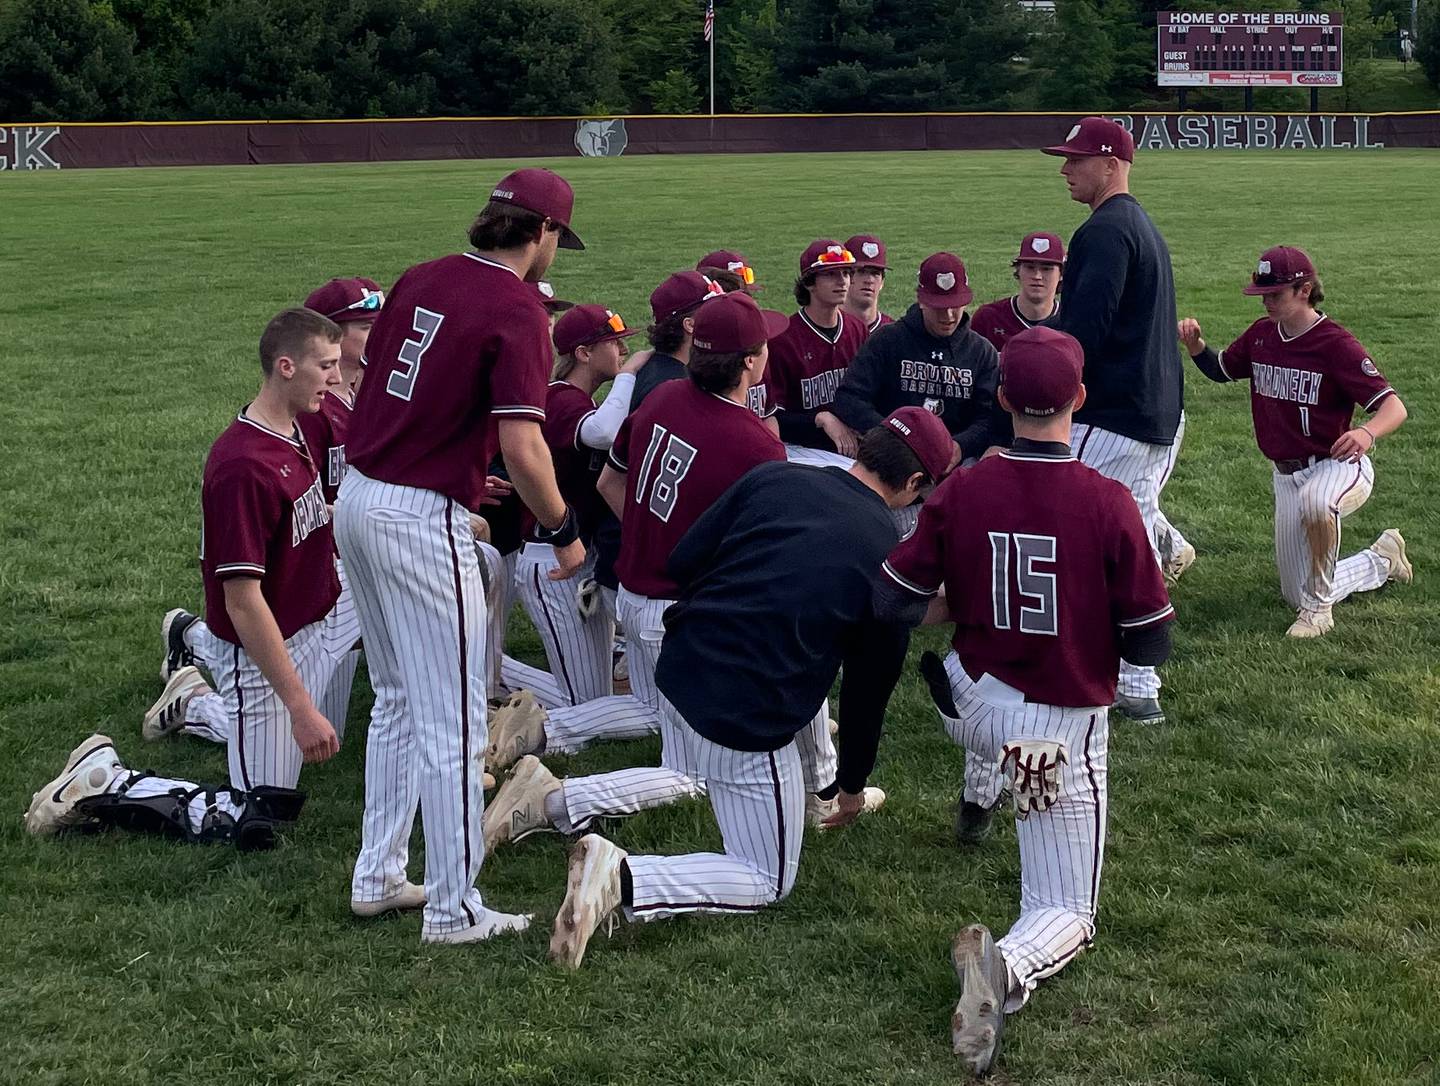 Broadneck baseball coach Matt Skrenchuk (standing) talks to his team after Monday's victory over Glen Burnie. The No. 3 Bruins remained in first in the Anne Arundel County standings with a 8-1 victory over Glen Burnie in Cape St. Claire.